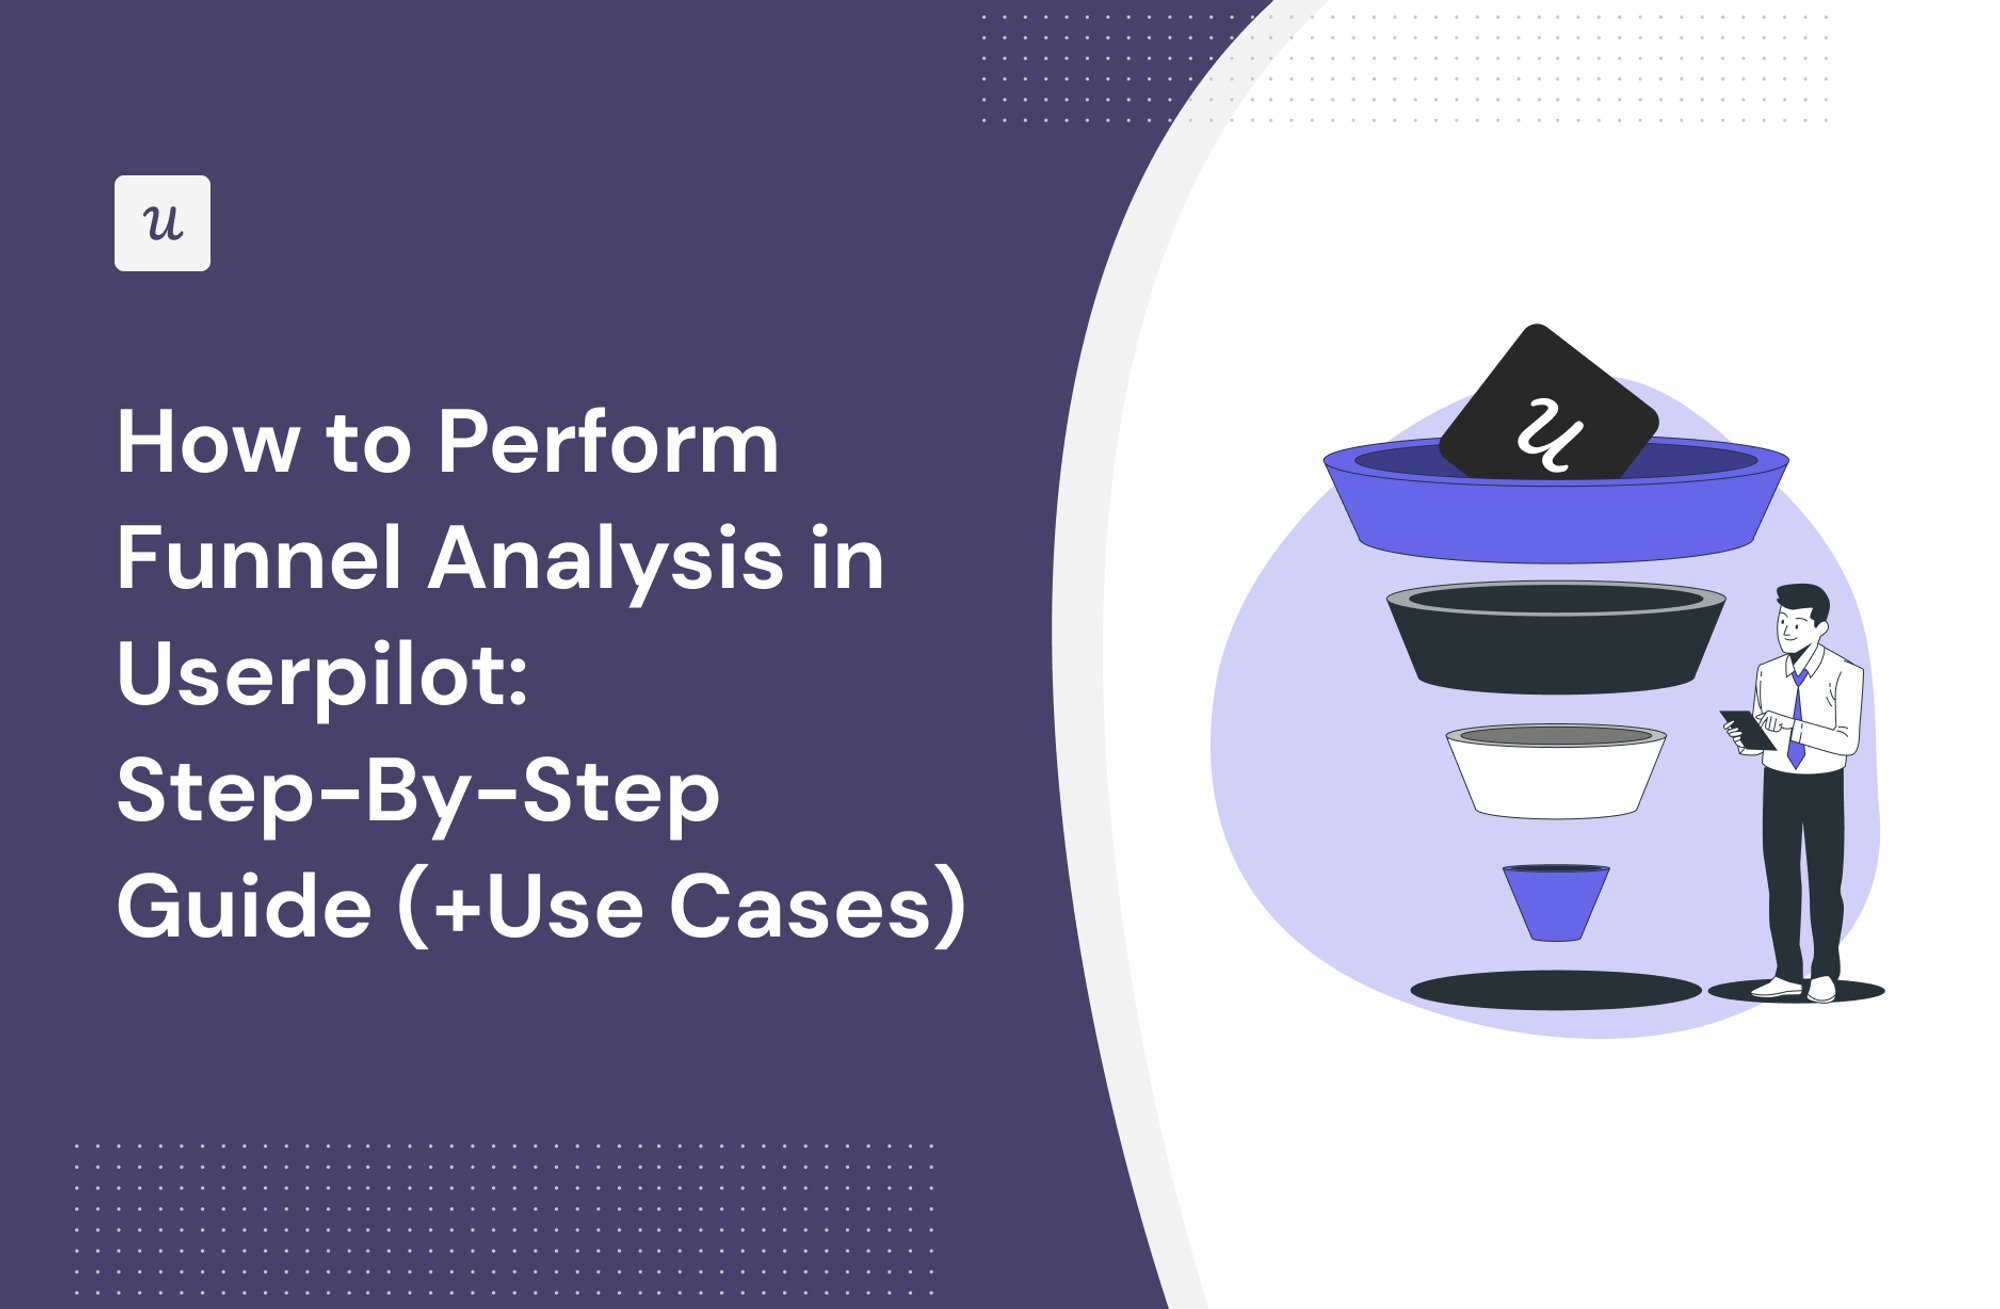 How to Perform Funnel Analysis in Userpilot: Step-By-Step Guide (+Use Cases) cover